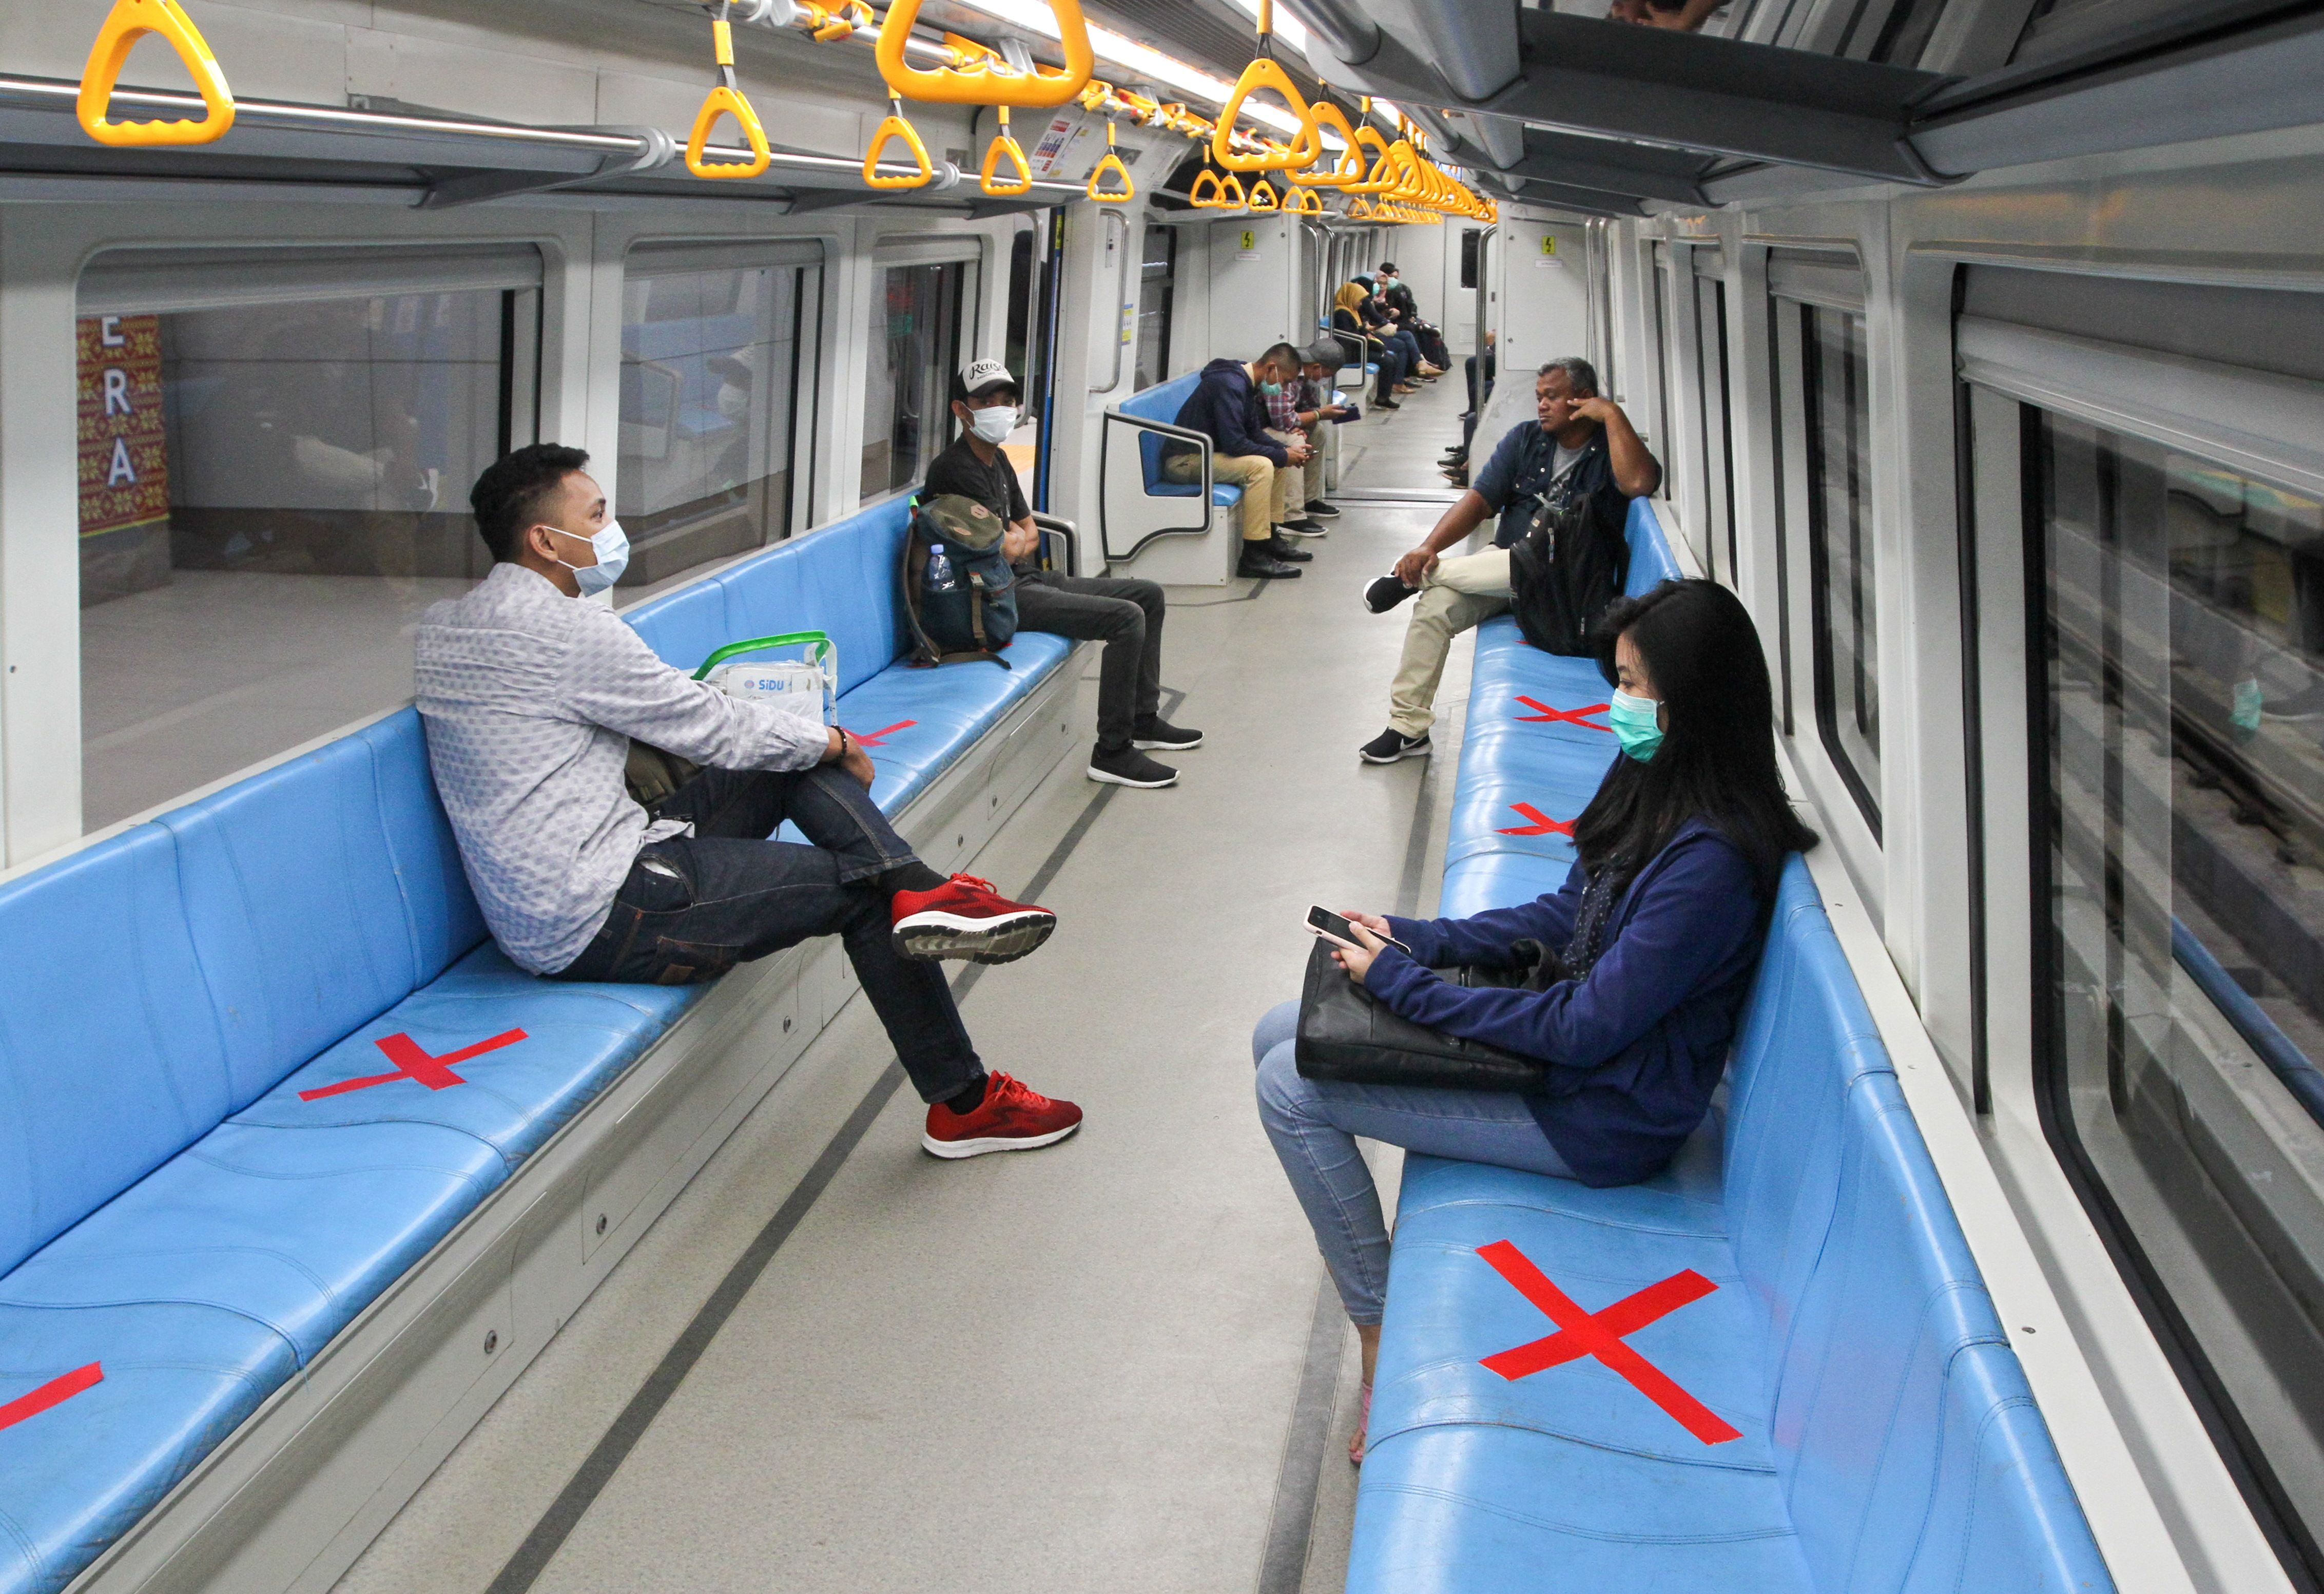 People sit on designated areas decided by red cross marks to ensure social distancing inside a light rapid transit train in Palembang, South Sumatra 